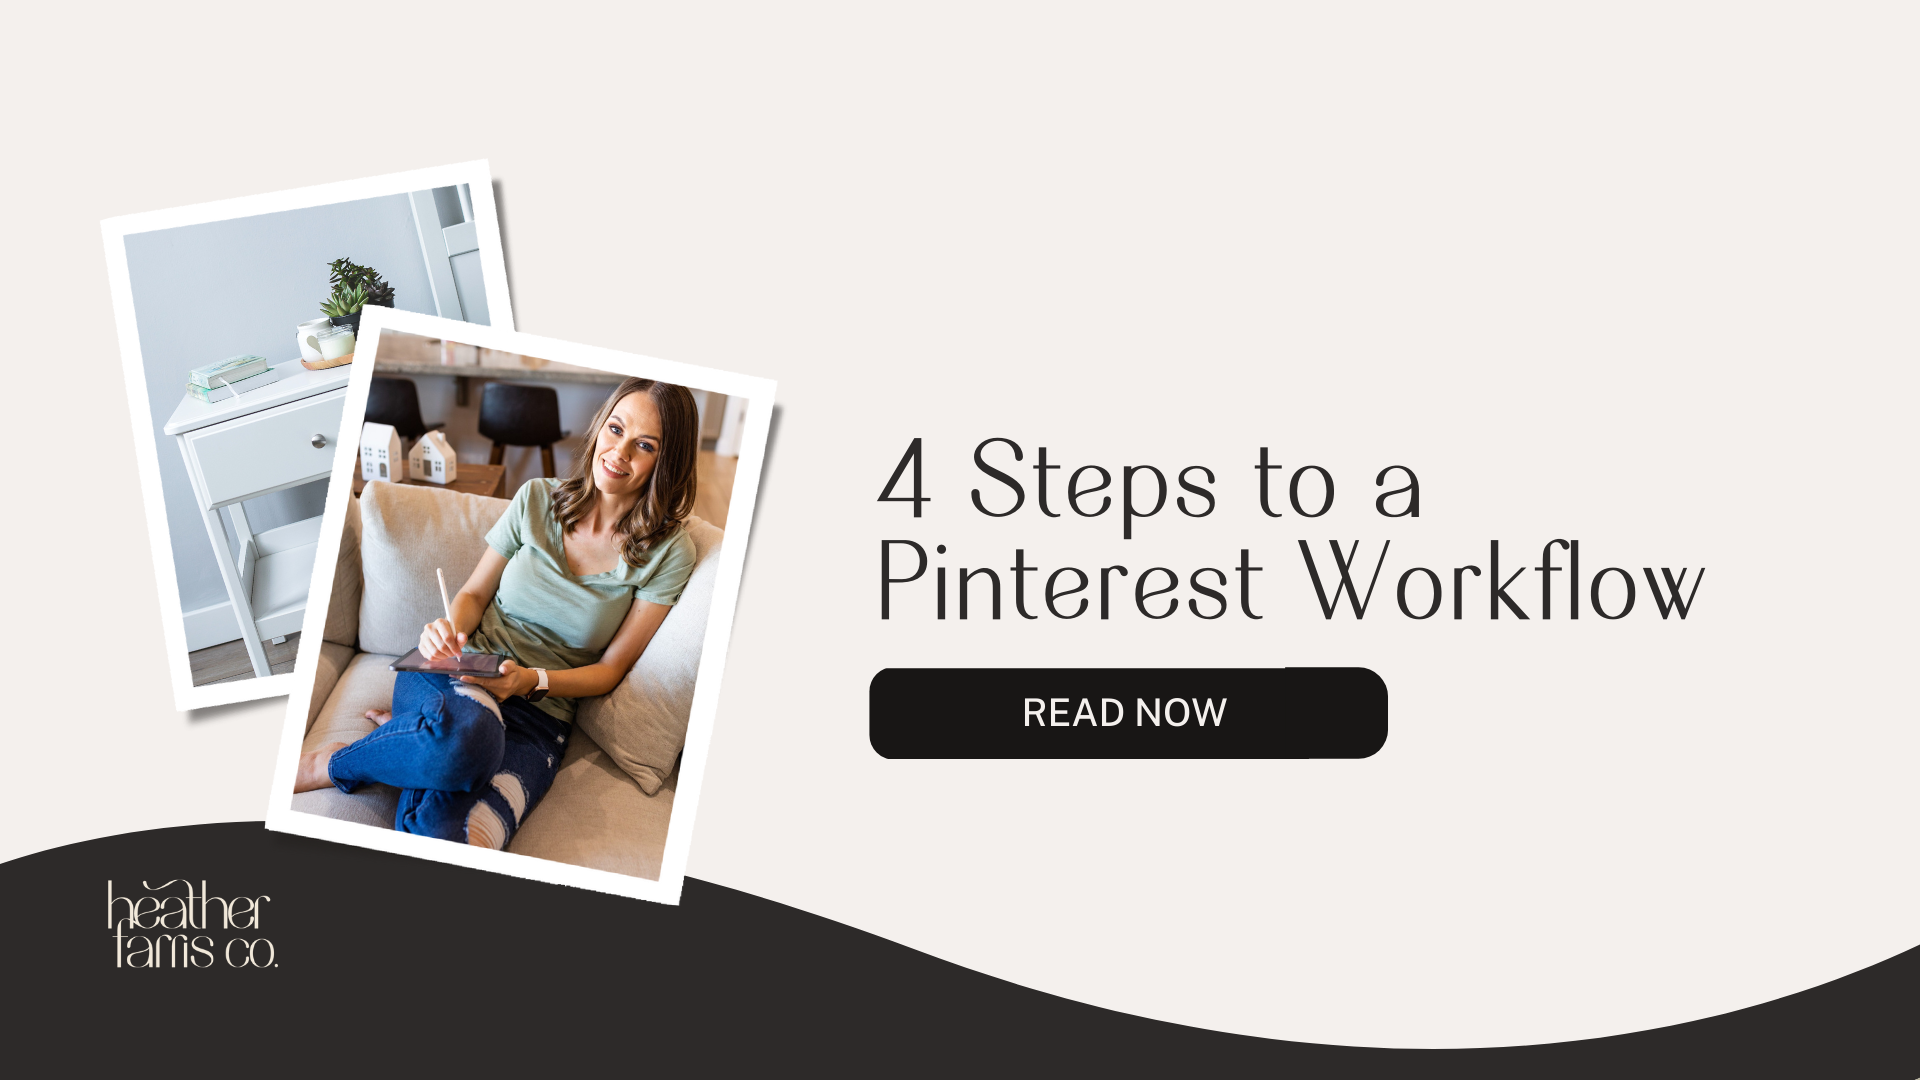 4 Steps to a Pinterest Workflow